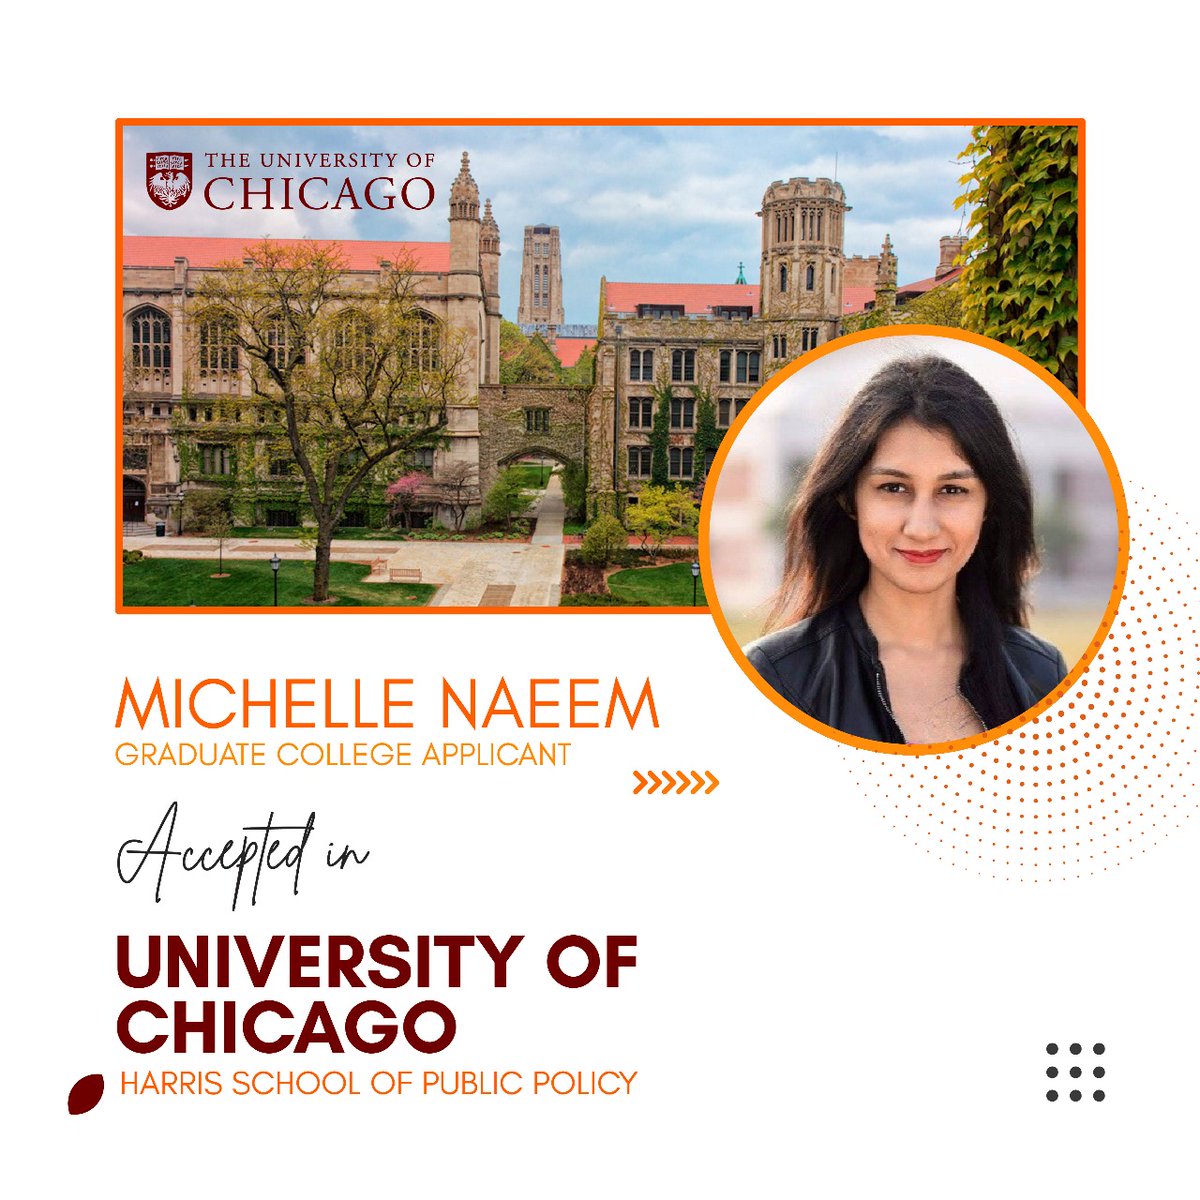 Michelle Naeem has been accepted into the Harris School of Public Policy at the University of Chicago, a ranked #3 institution in Public Policy Analysis. Michelle has already been accepted at many ranked universities.
Congratulations, Michelle!
#EyeOnIvy #EducationConsultants